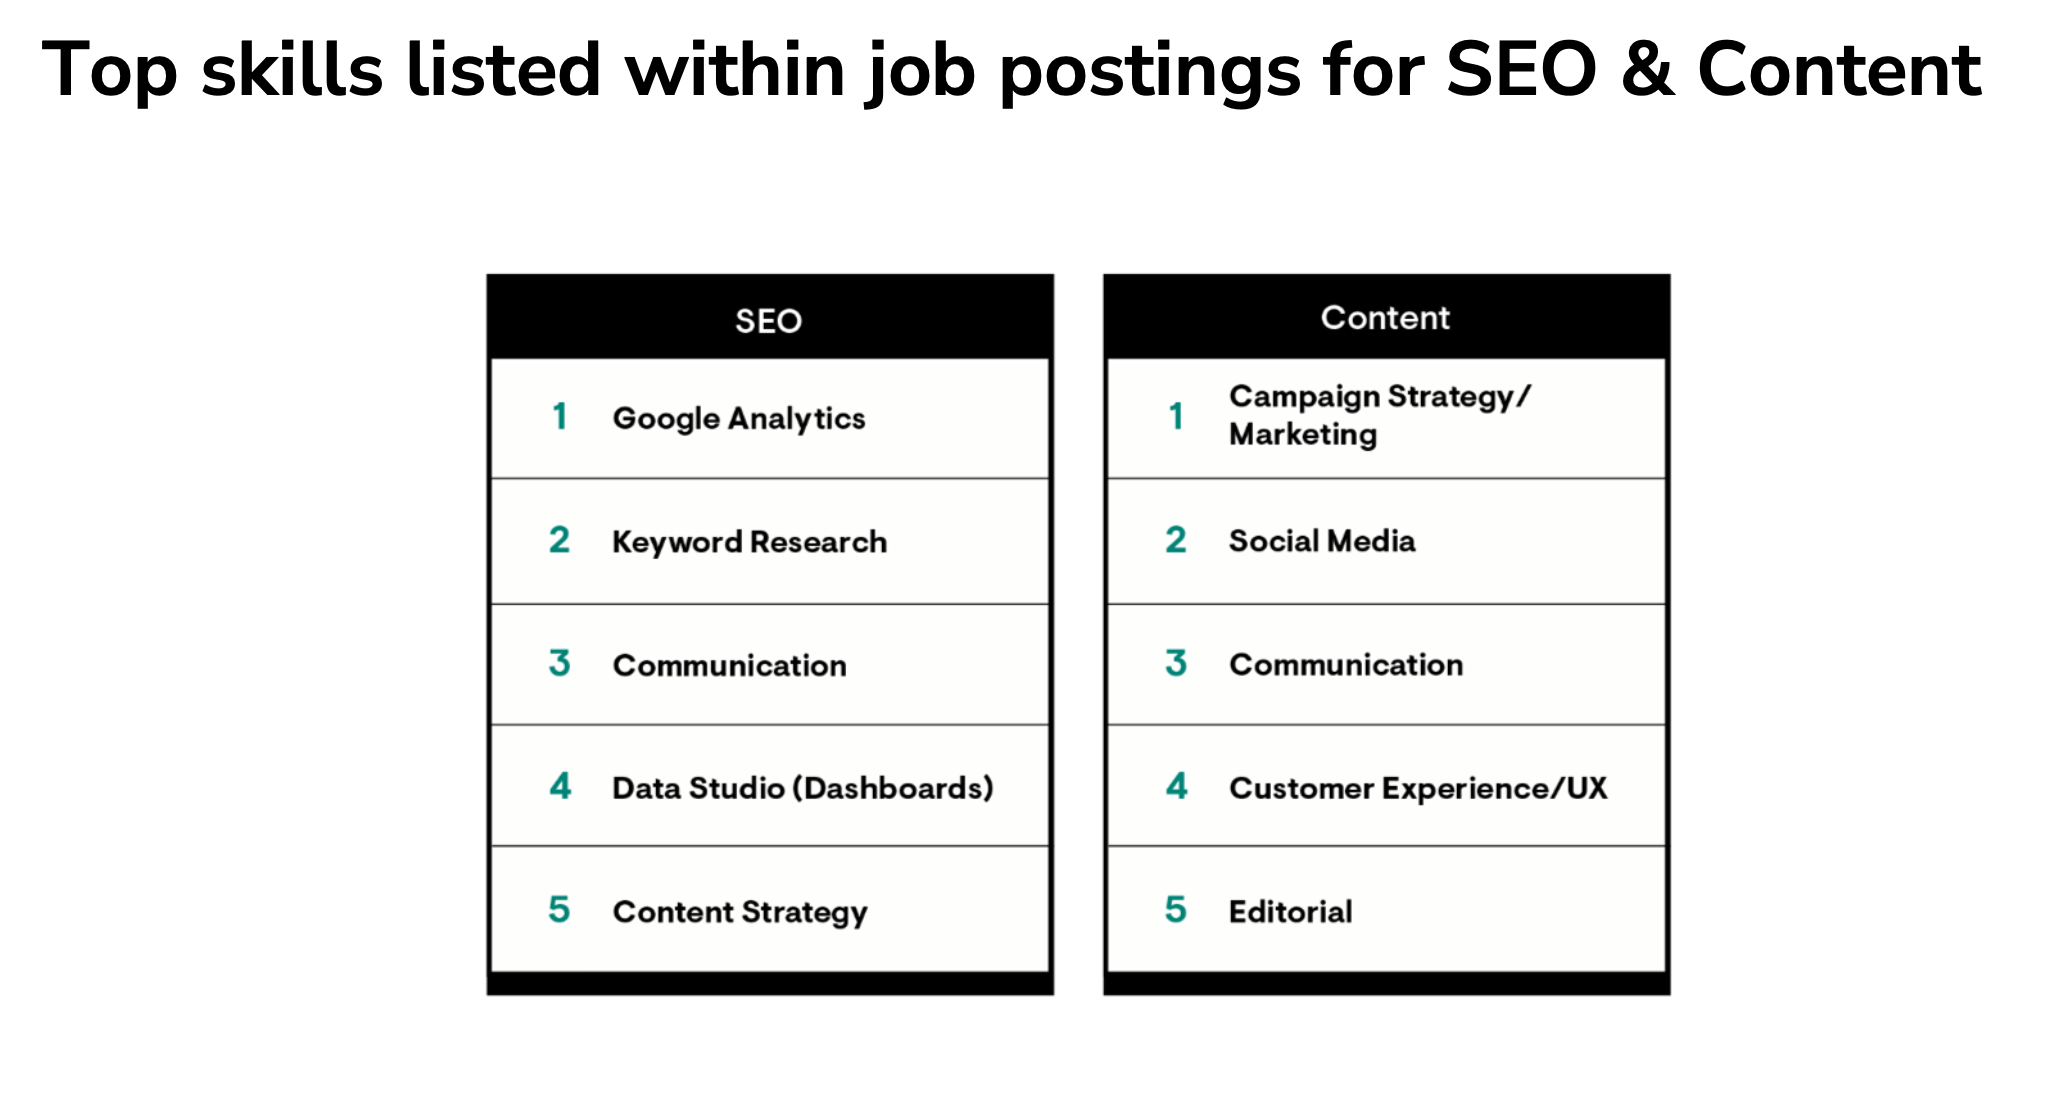 How To Hire Top SEO & Content Marketing Talent In 2023